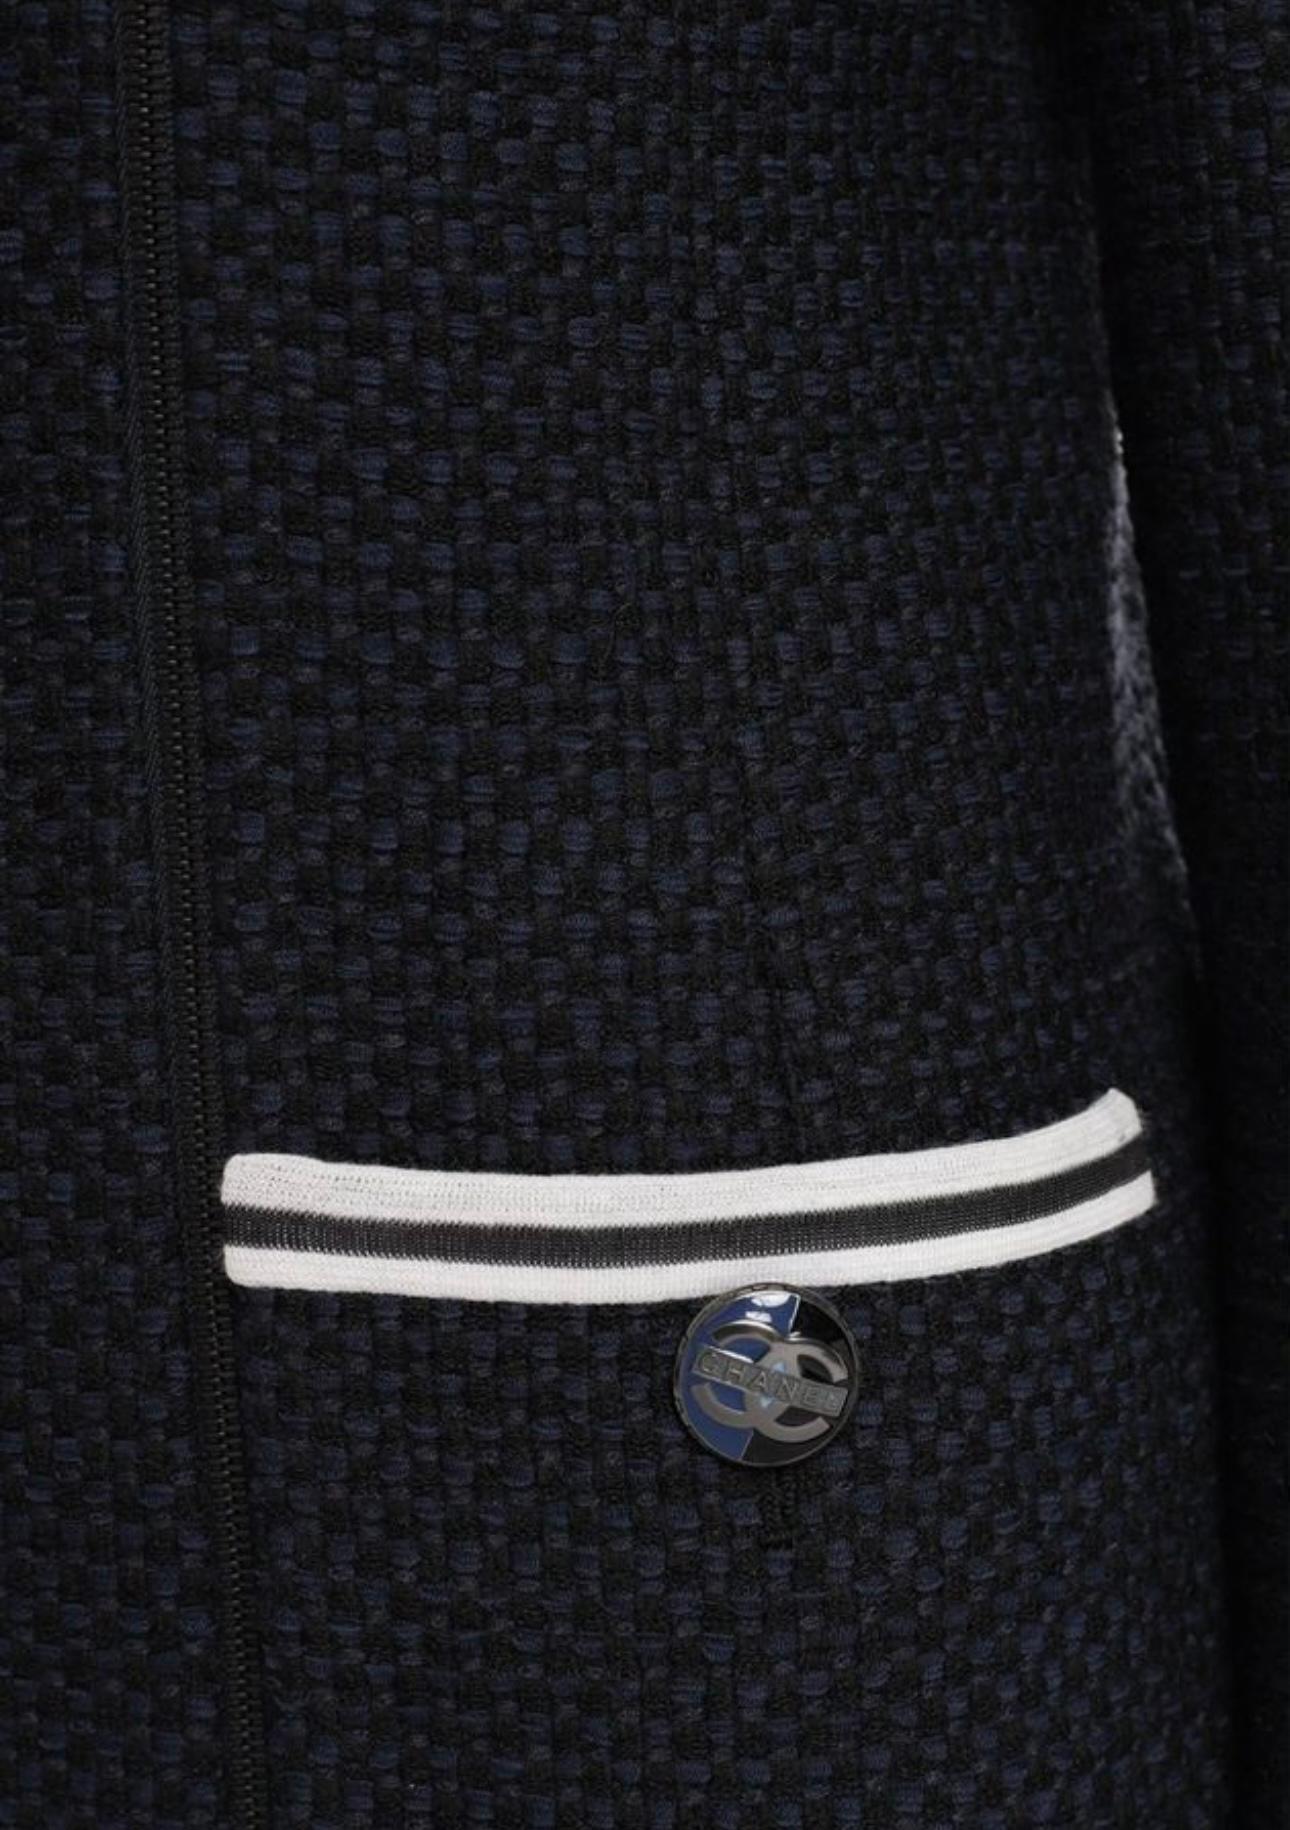 Chanel New Maritime Tweed Jacket with CC Buttons In New Condition For Sale In Dubai, AE